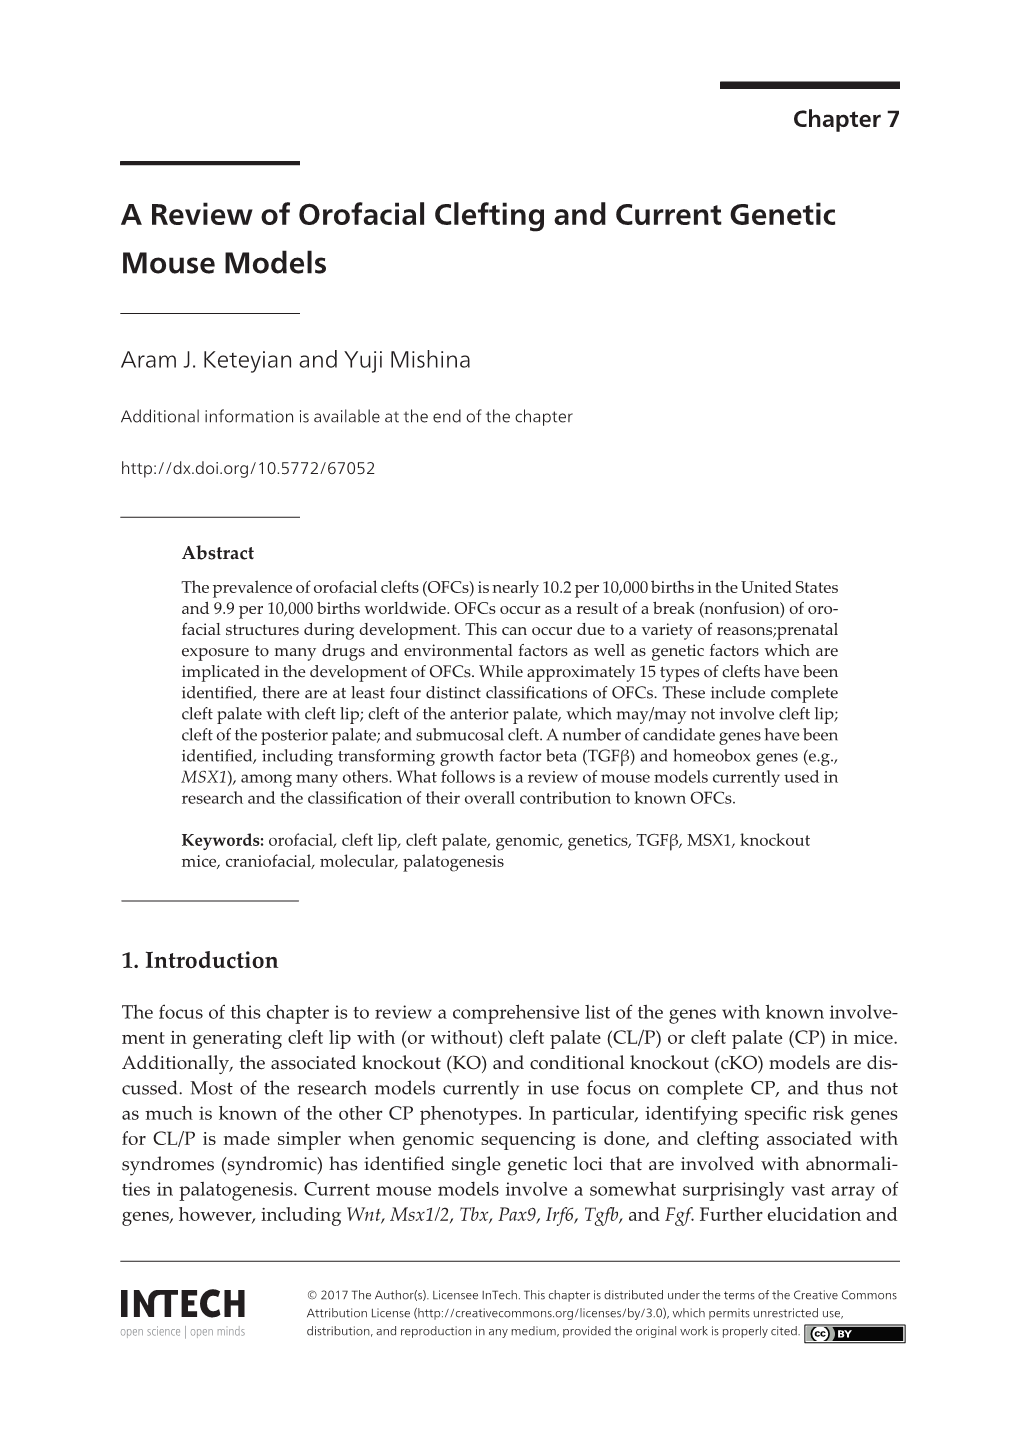 A Review of Orofacial Clefting and Current Genetic Mouse Models 125